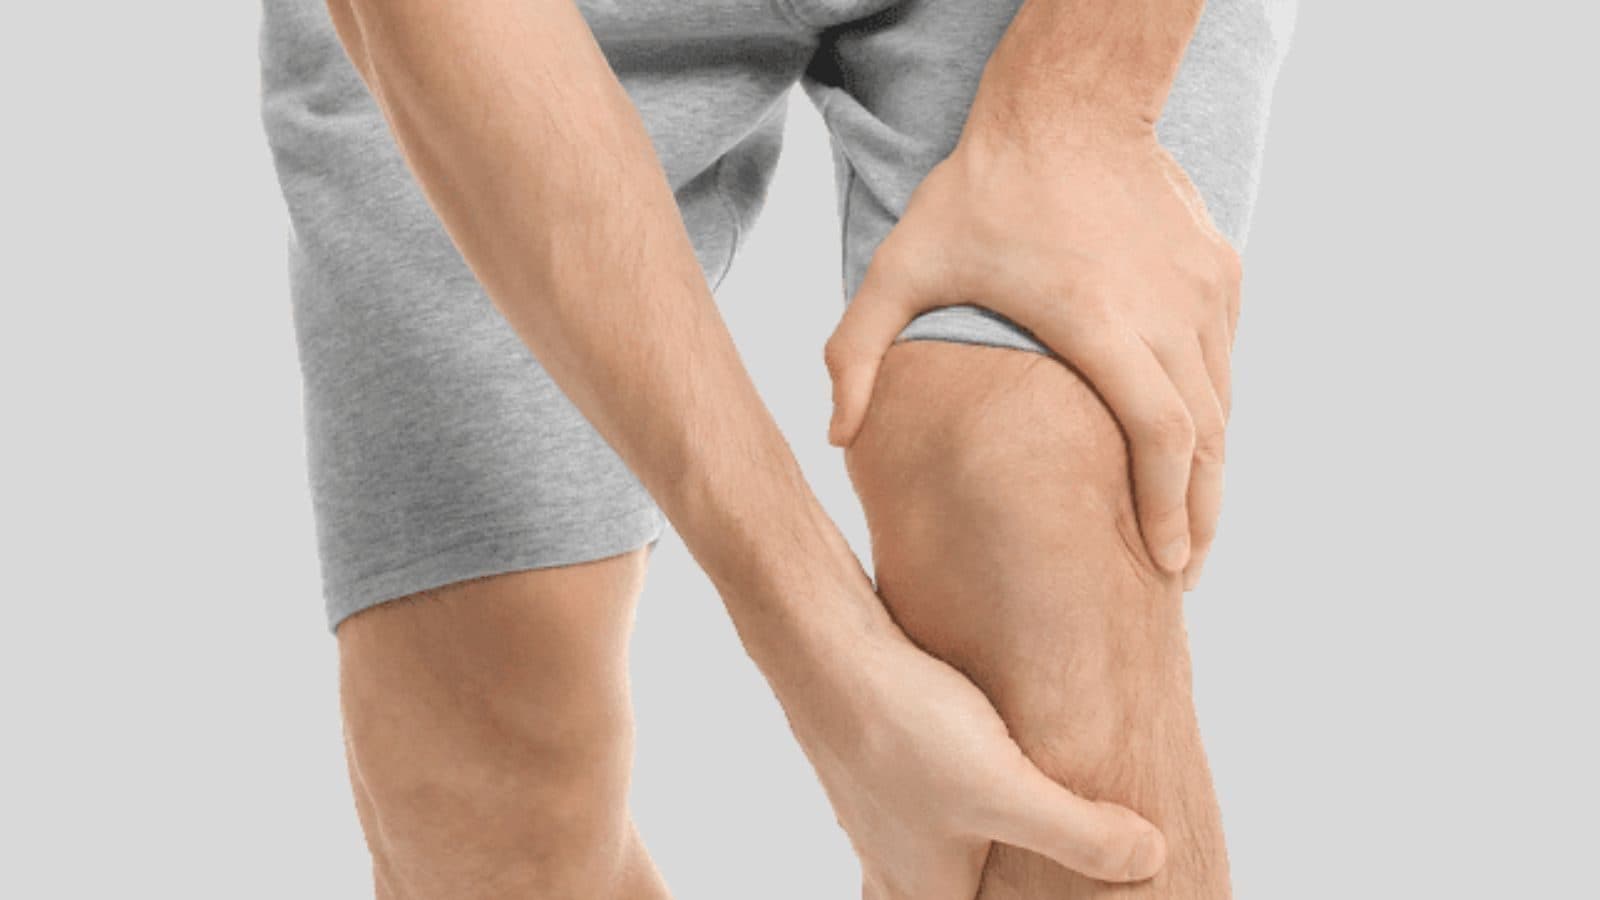 Knee pain relief remedies Now say bye bye to knee pain apply this oil it  will give relief in a pinch - Knee pain relief remedies: હવે ઘૂંટણના  દુખવાને કહો bye bye,લગાવો